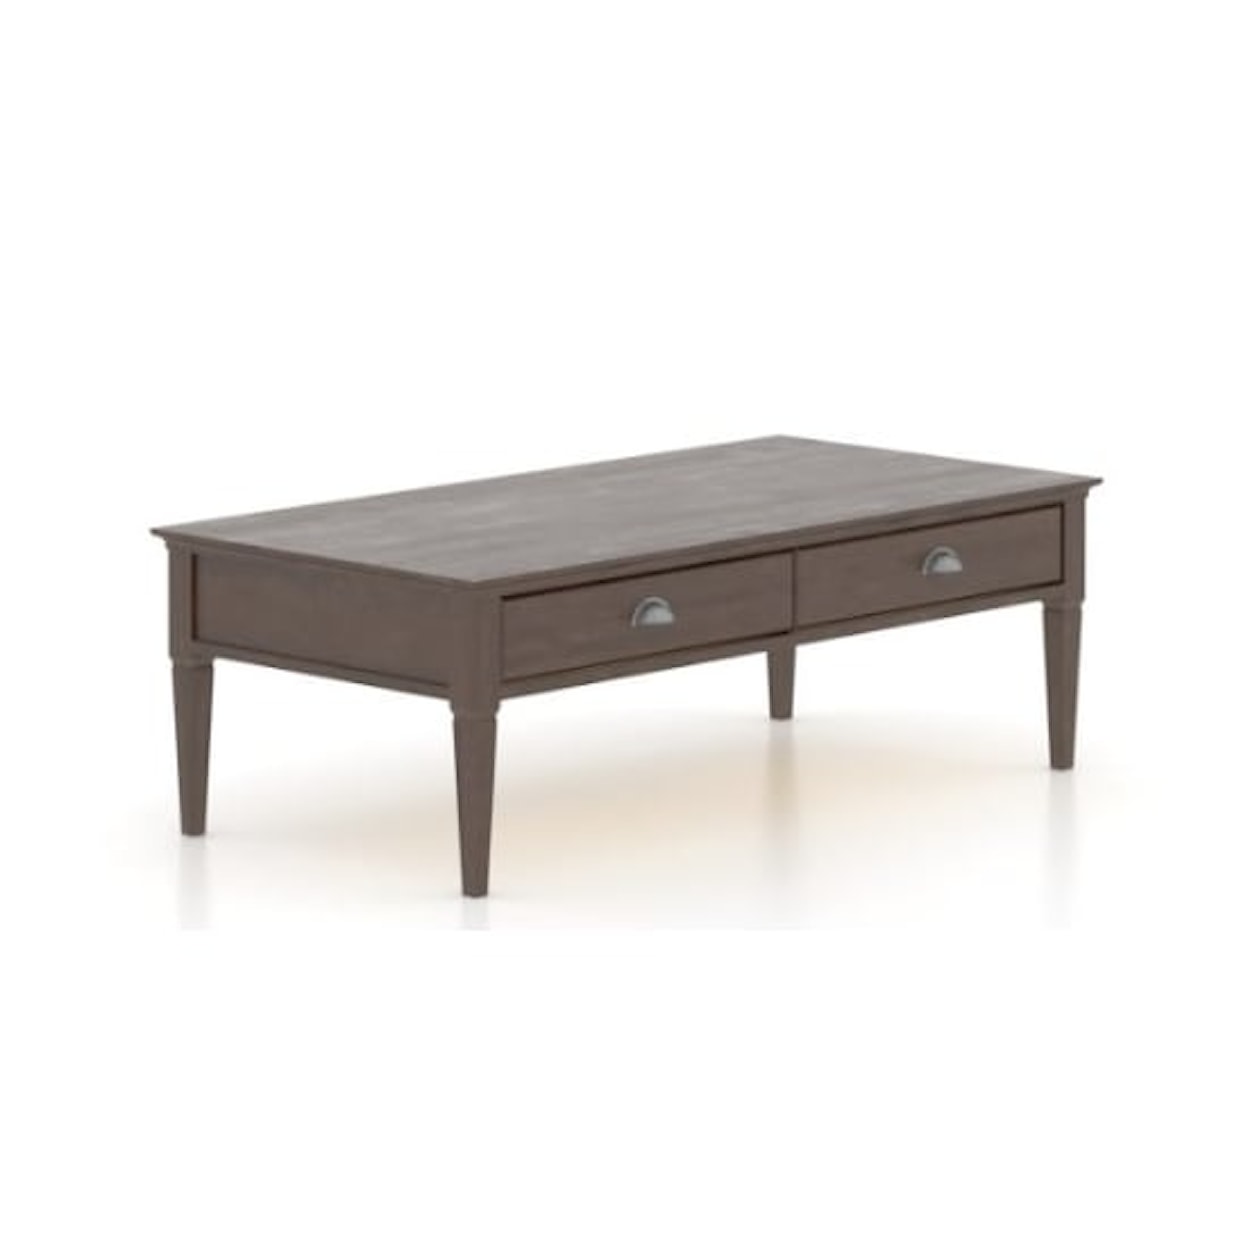 Canadel Accent Littoral Rectangular Coffee Table